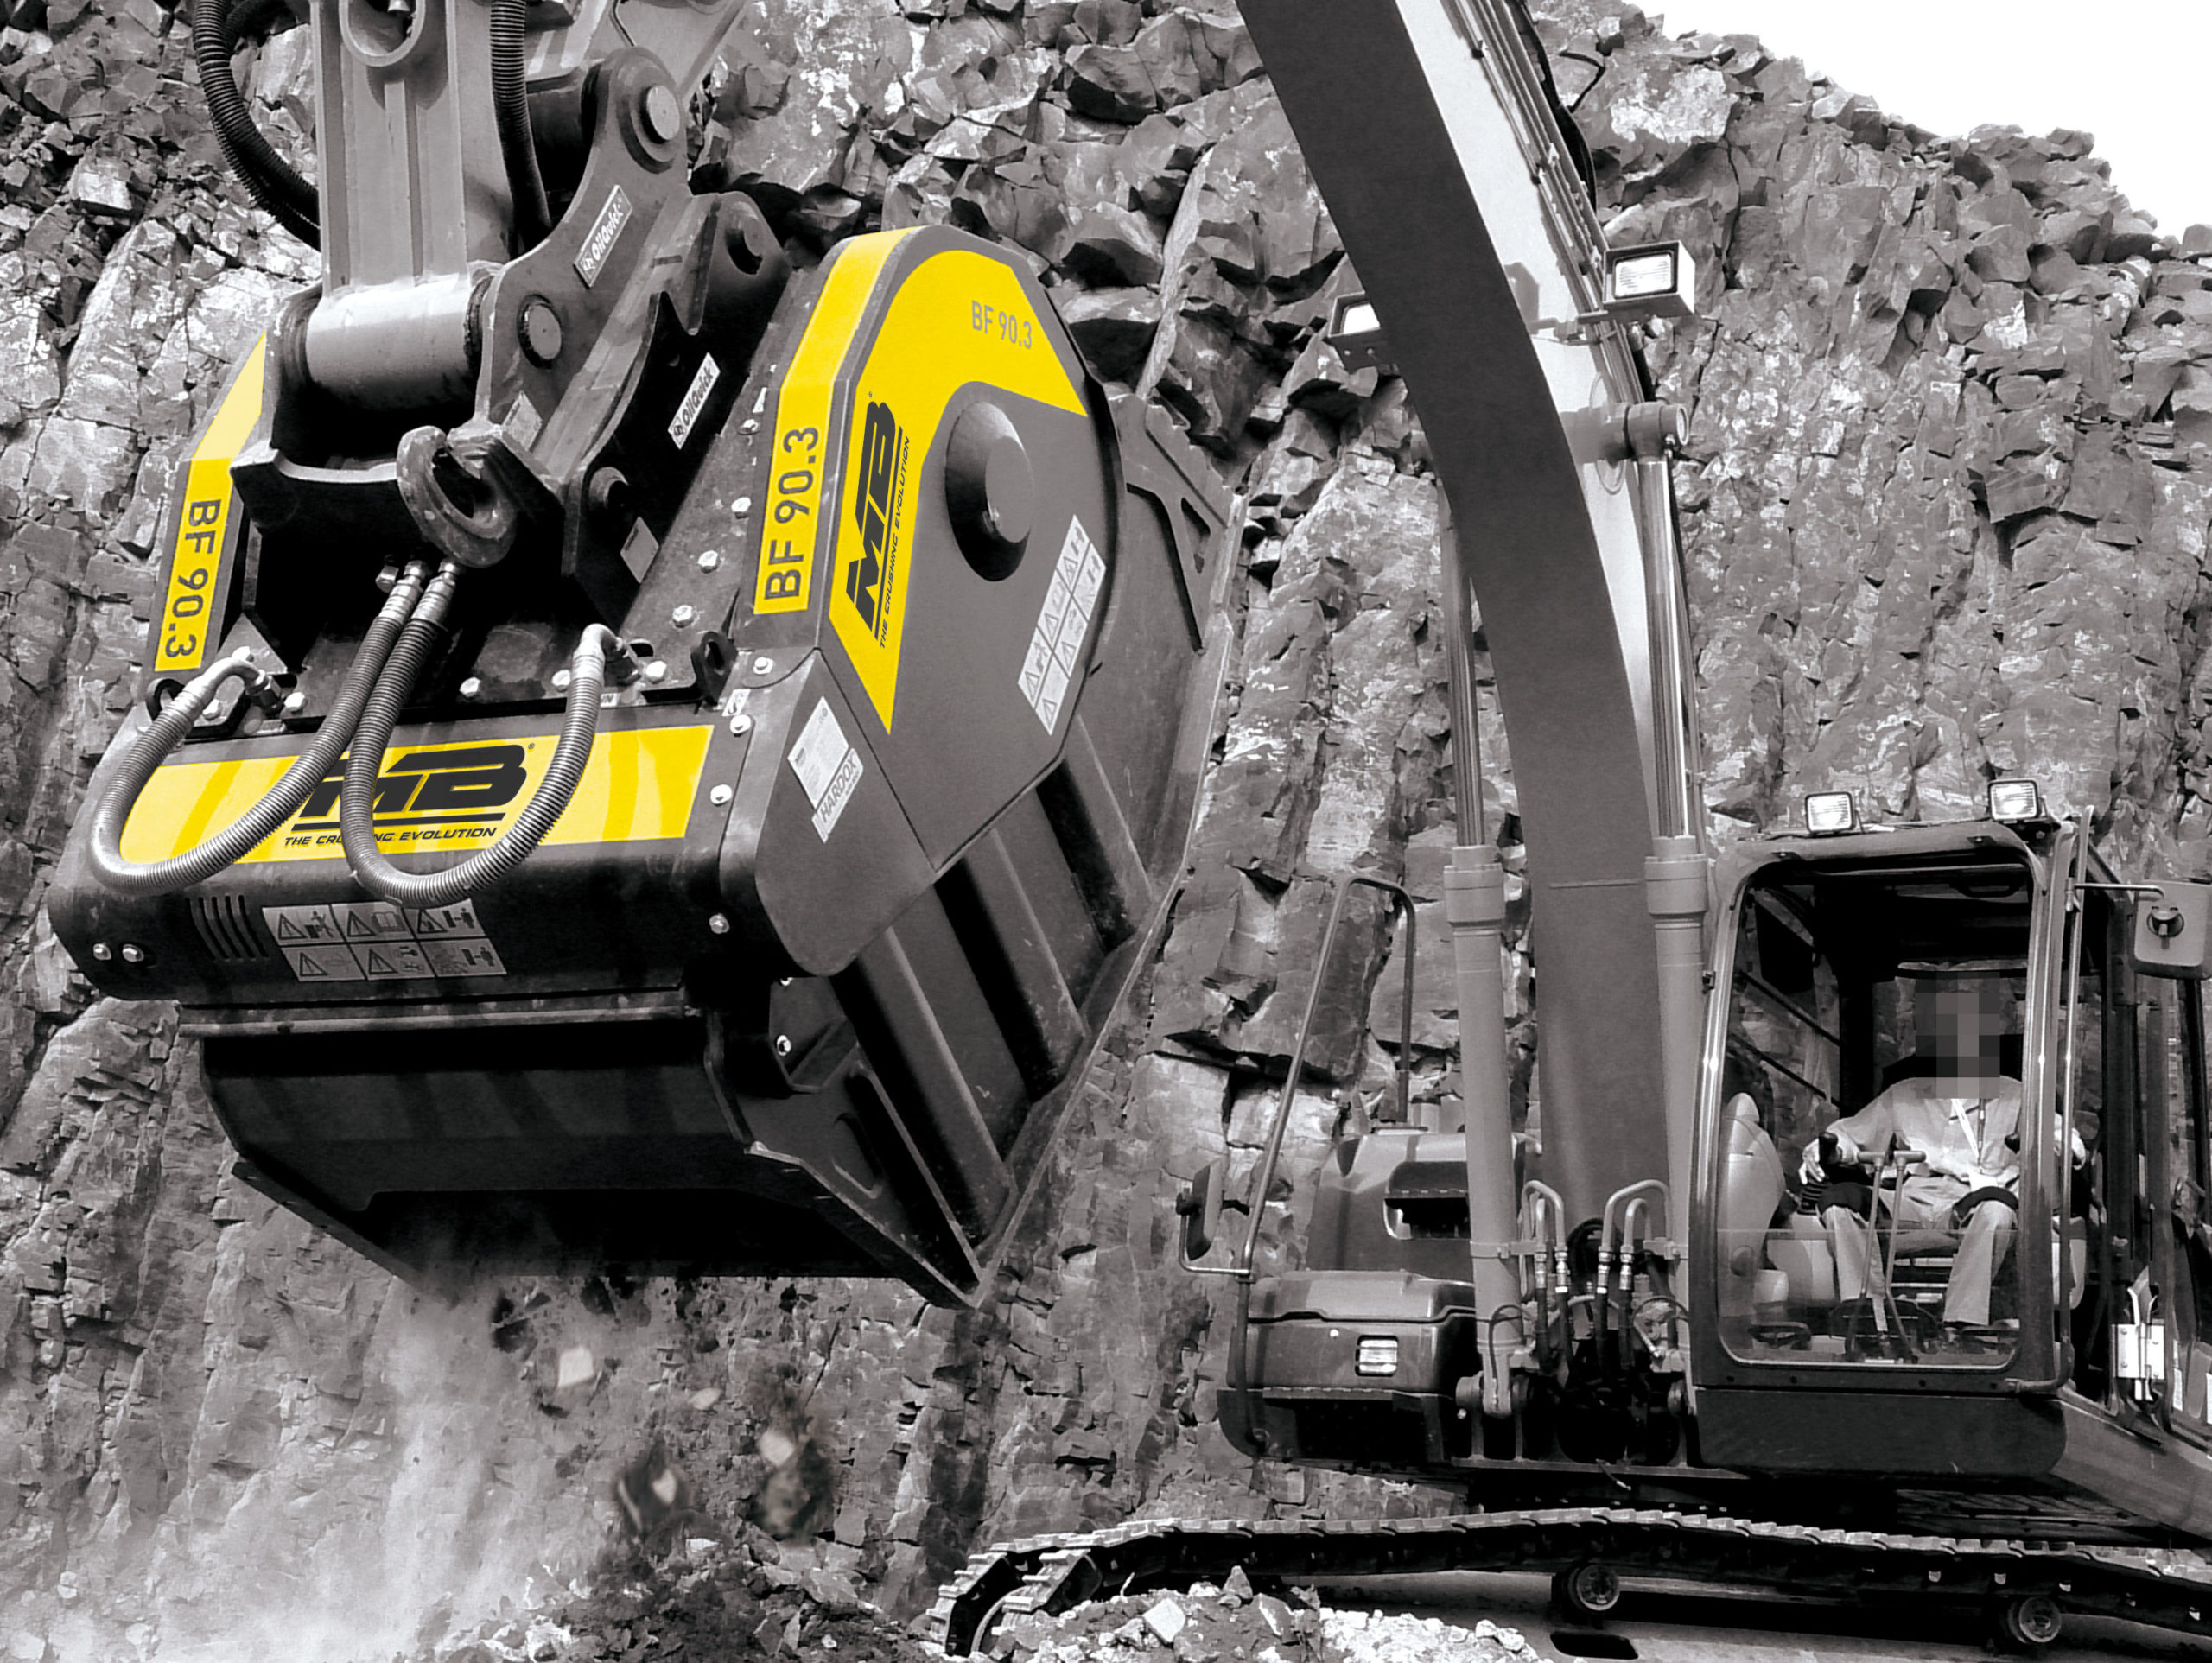 Ranking of the best excavator crushing buckets for 2020